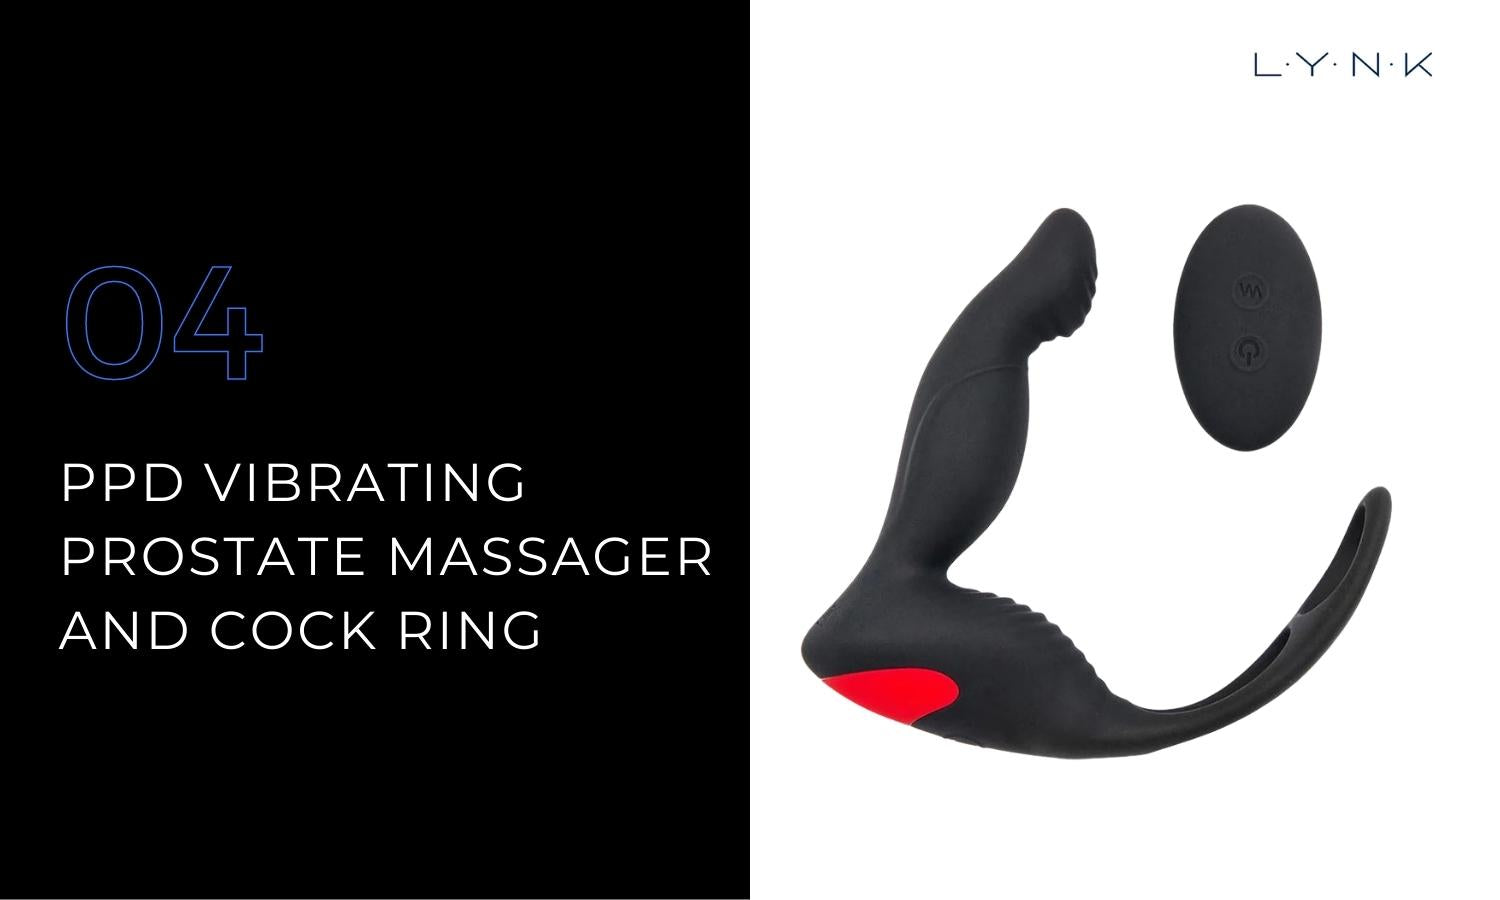 PPD Vibrating Prostate Massager and Cock Ring